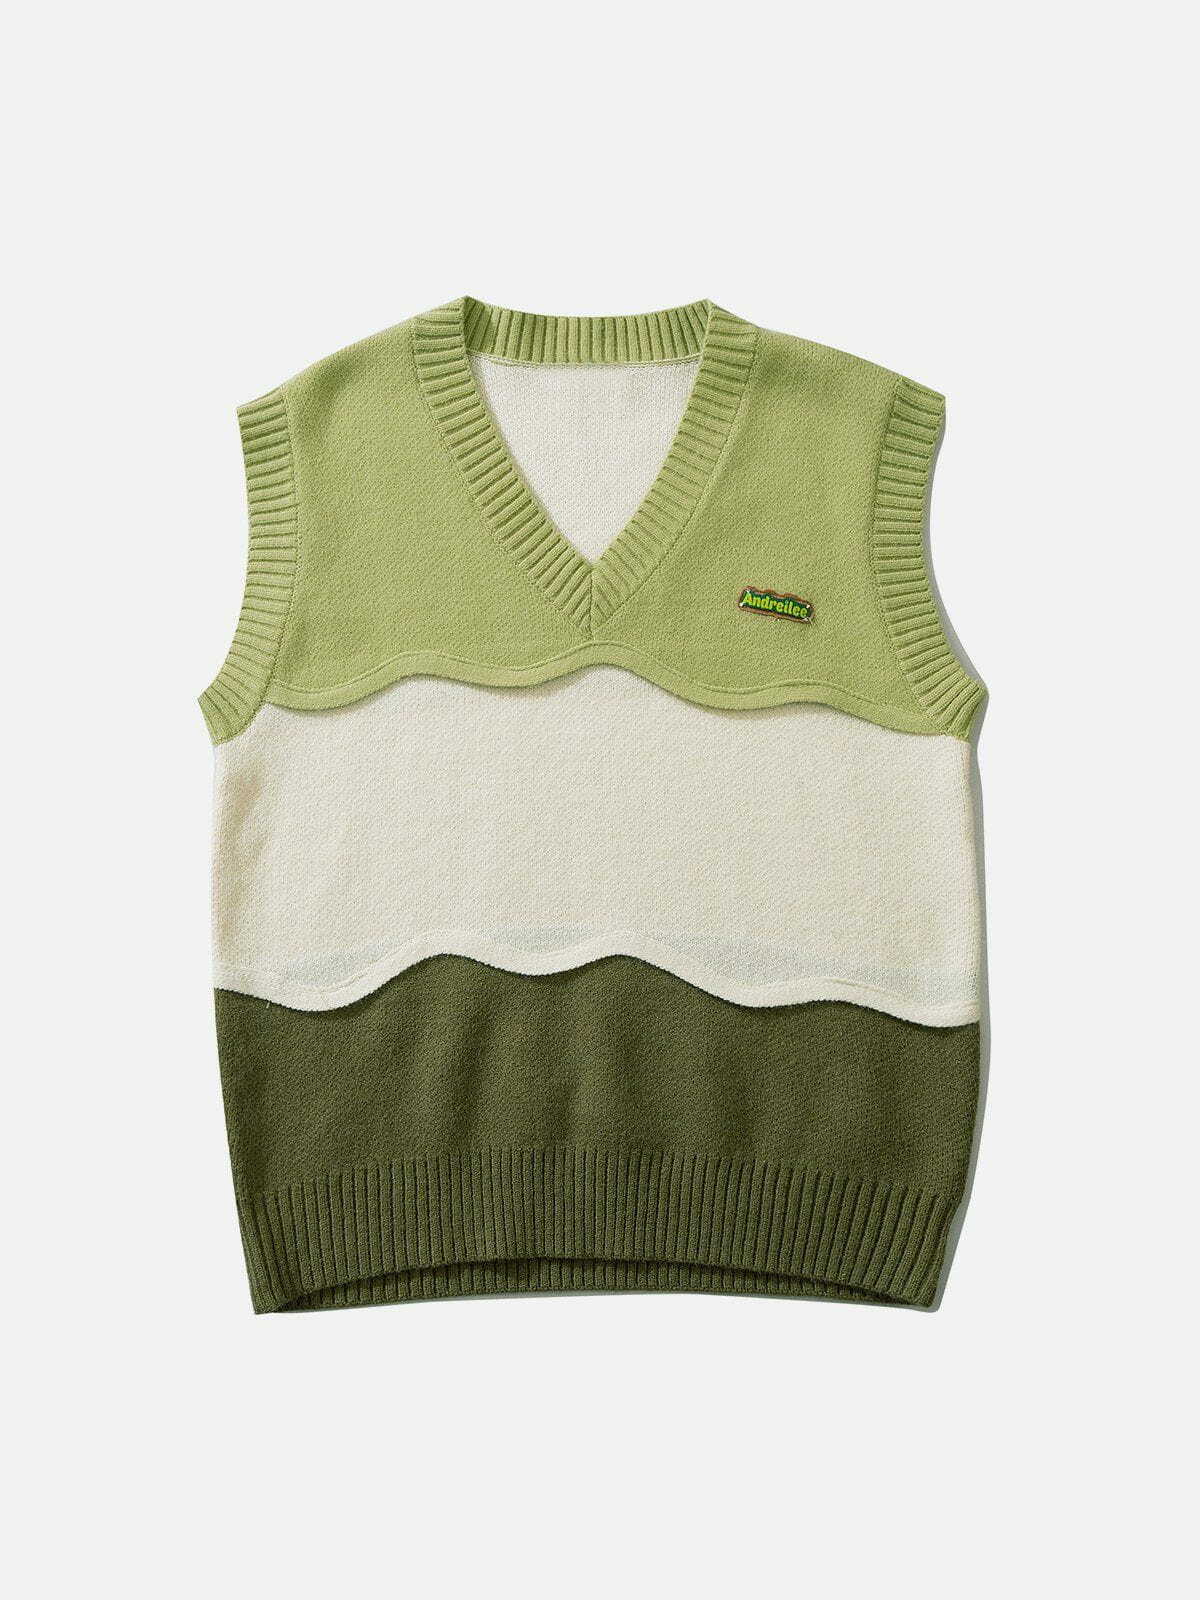 tricolor stitching sweater vest edgy y2k streetwear essential 5615